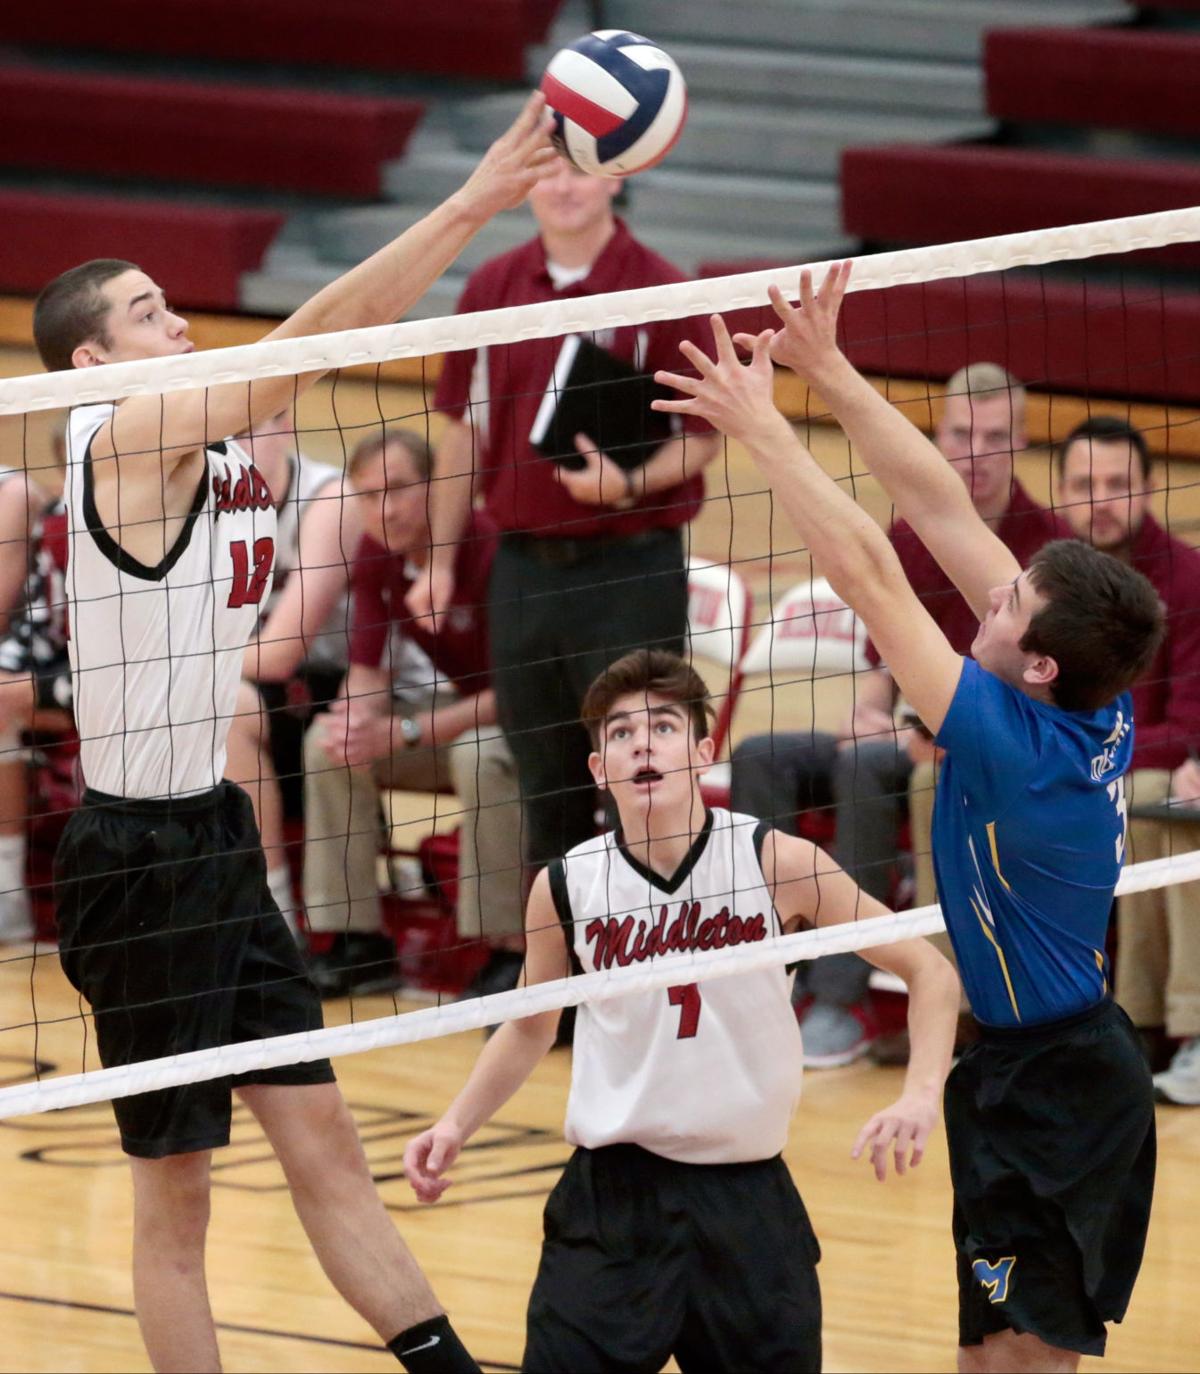 WIAA boys volleyball Brian Vergenz steps up to help Middleton earn